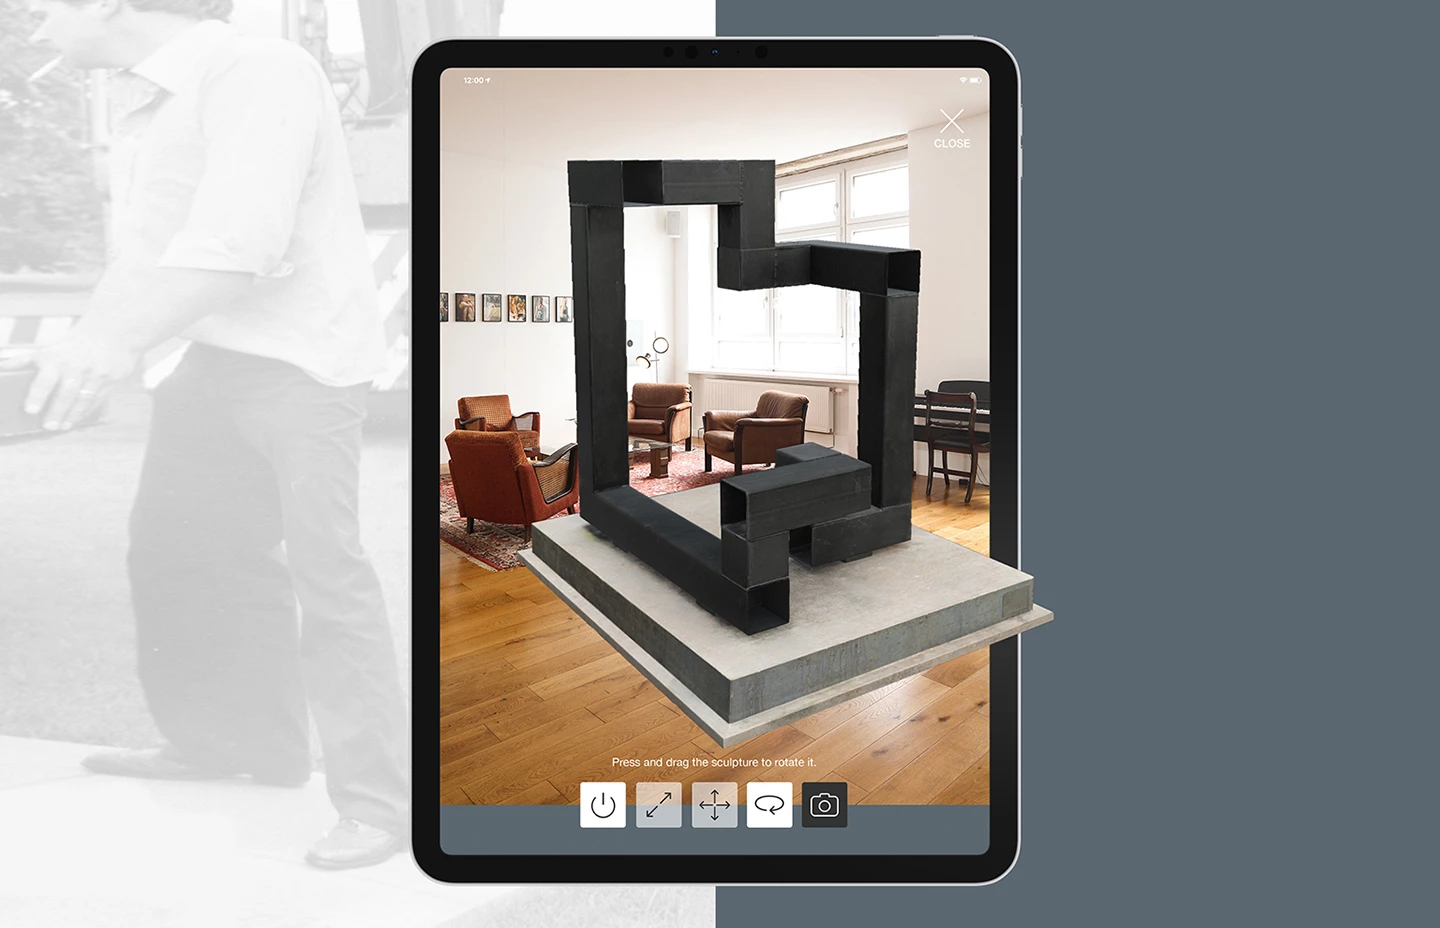 An ipad using the AR camera to view a sculpture